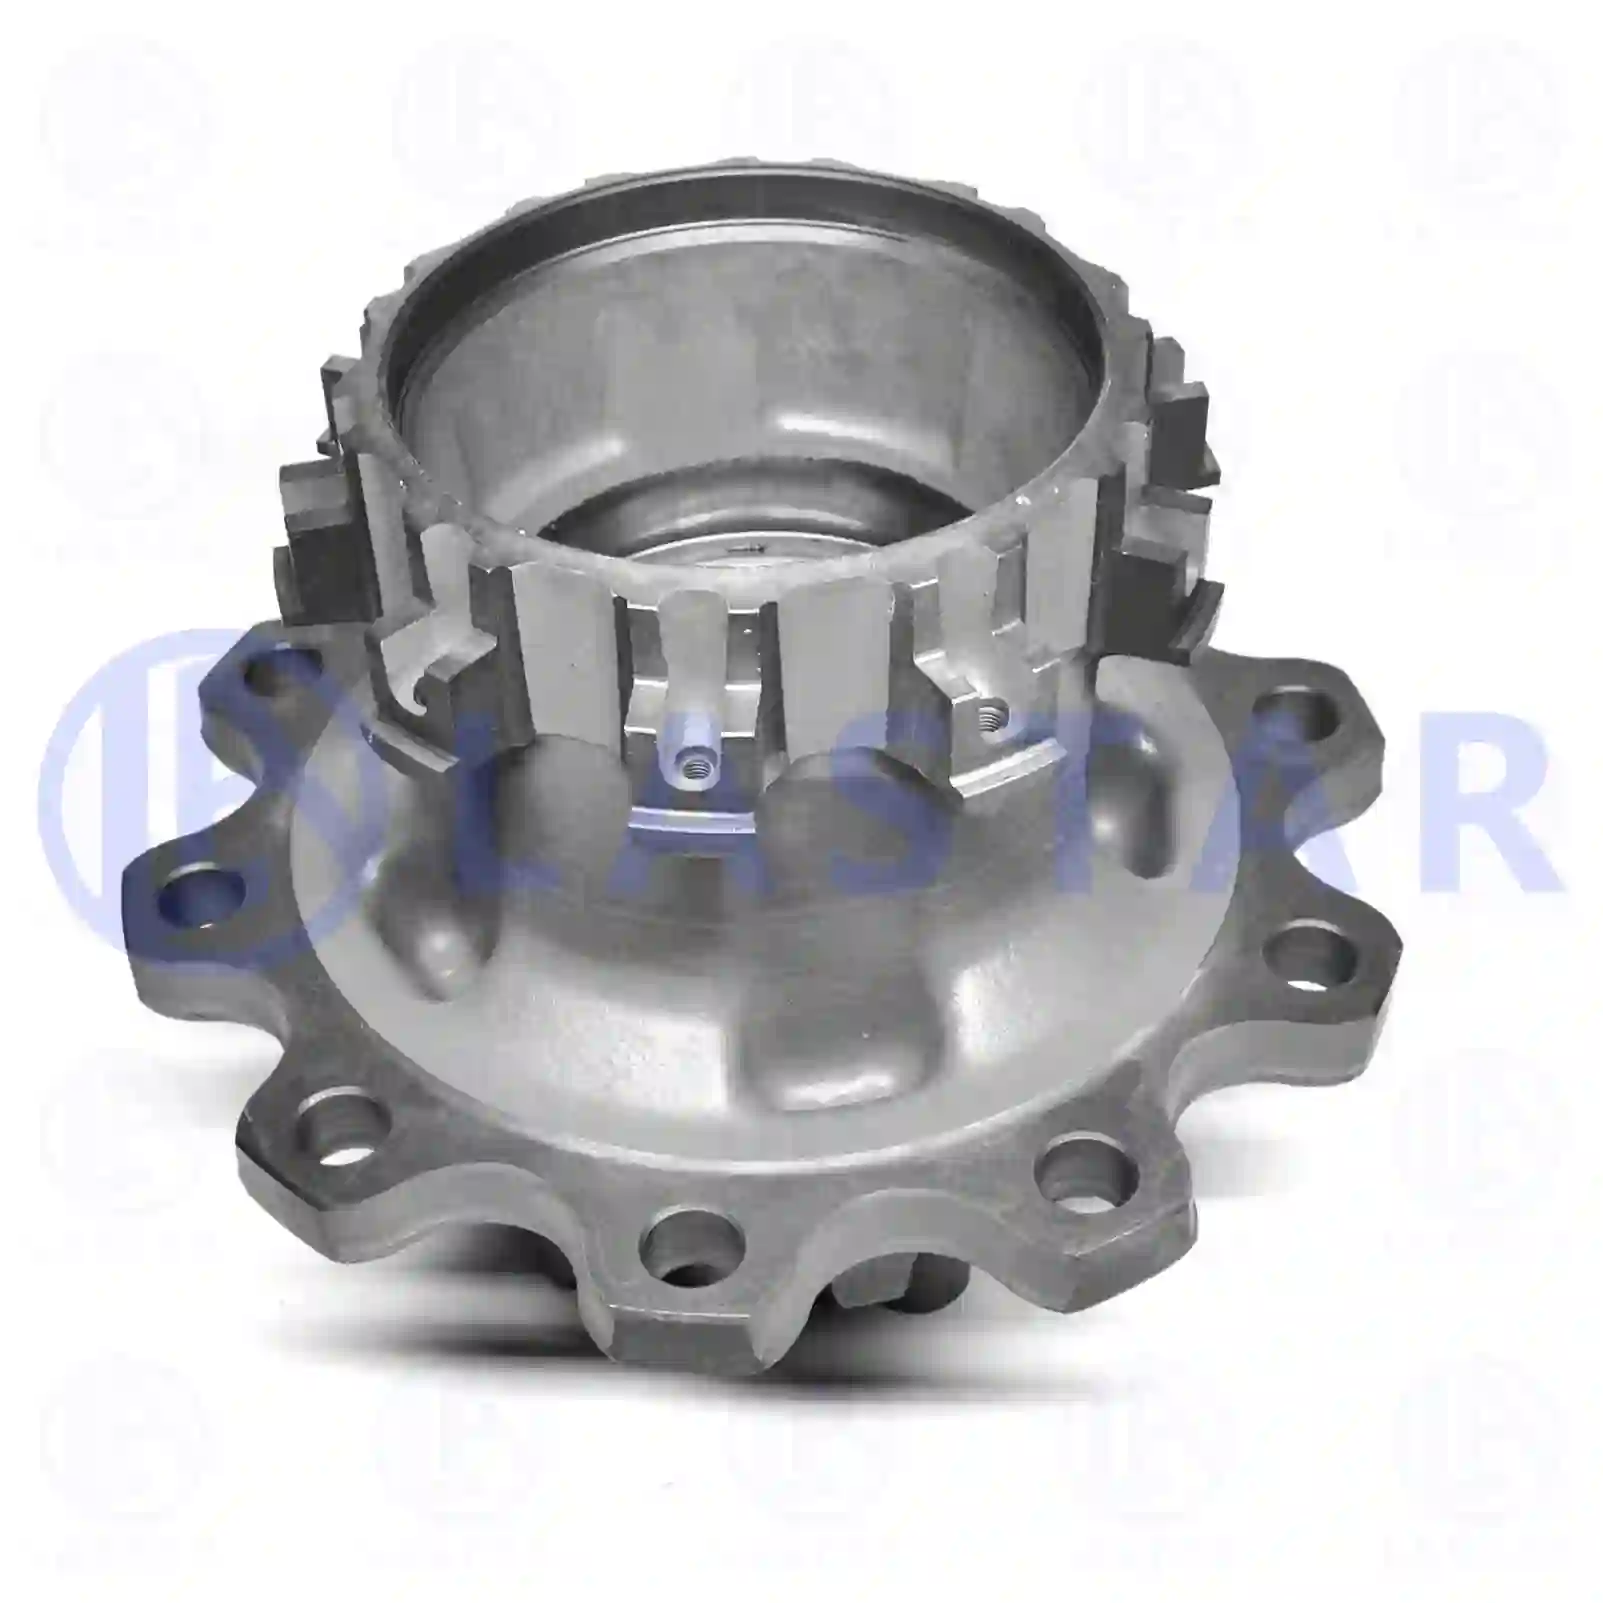 Wheel hub, without bearings, 77726535, 1812161S, 2019802S, , , , , , , ||  77726535 Lastar Spare Part | Truck Spare Parts, Auotomotive Spare Parts Wheel hub, without bearings, 77726535, 1812161S, 2019802S, , , , , , , ||  77726535 Lastar Spare Part | Truck Spare Parts, Auotomotive Spare Parts